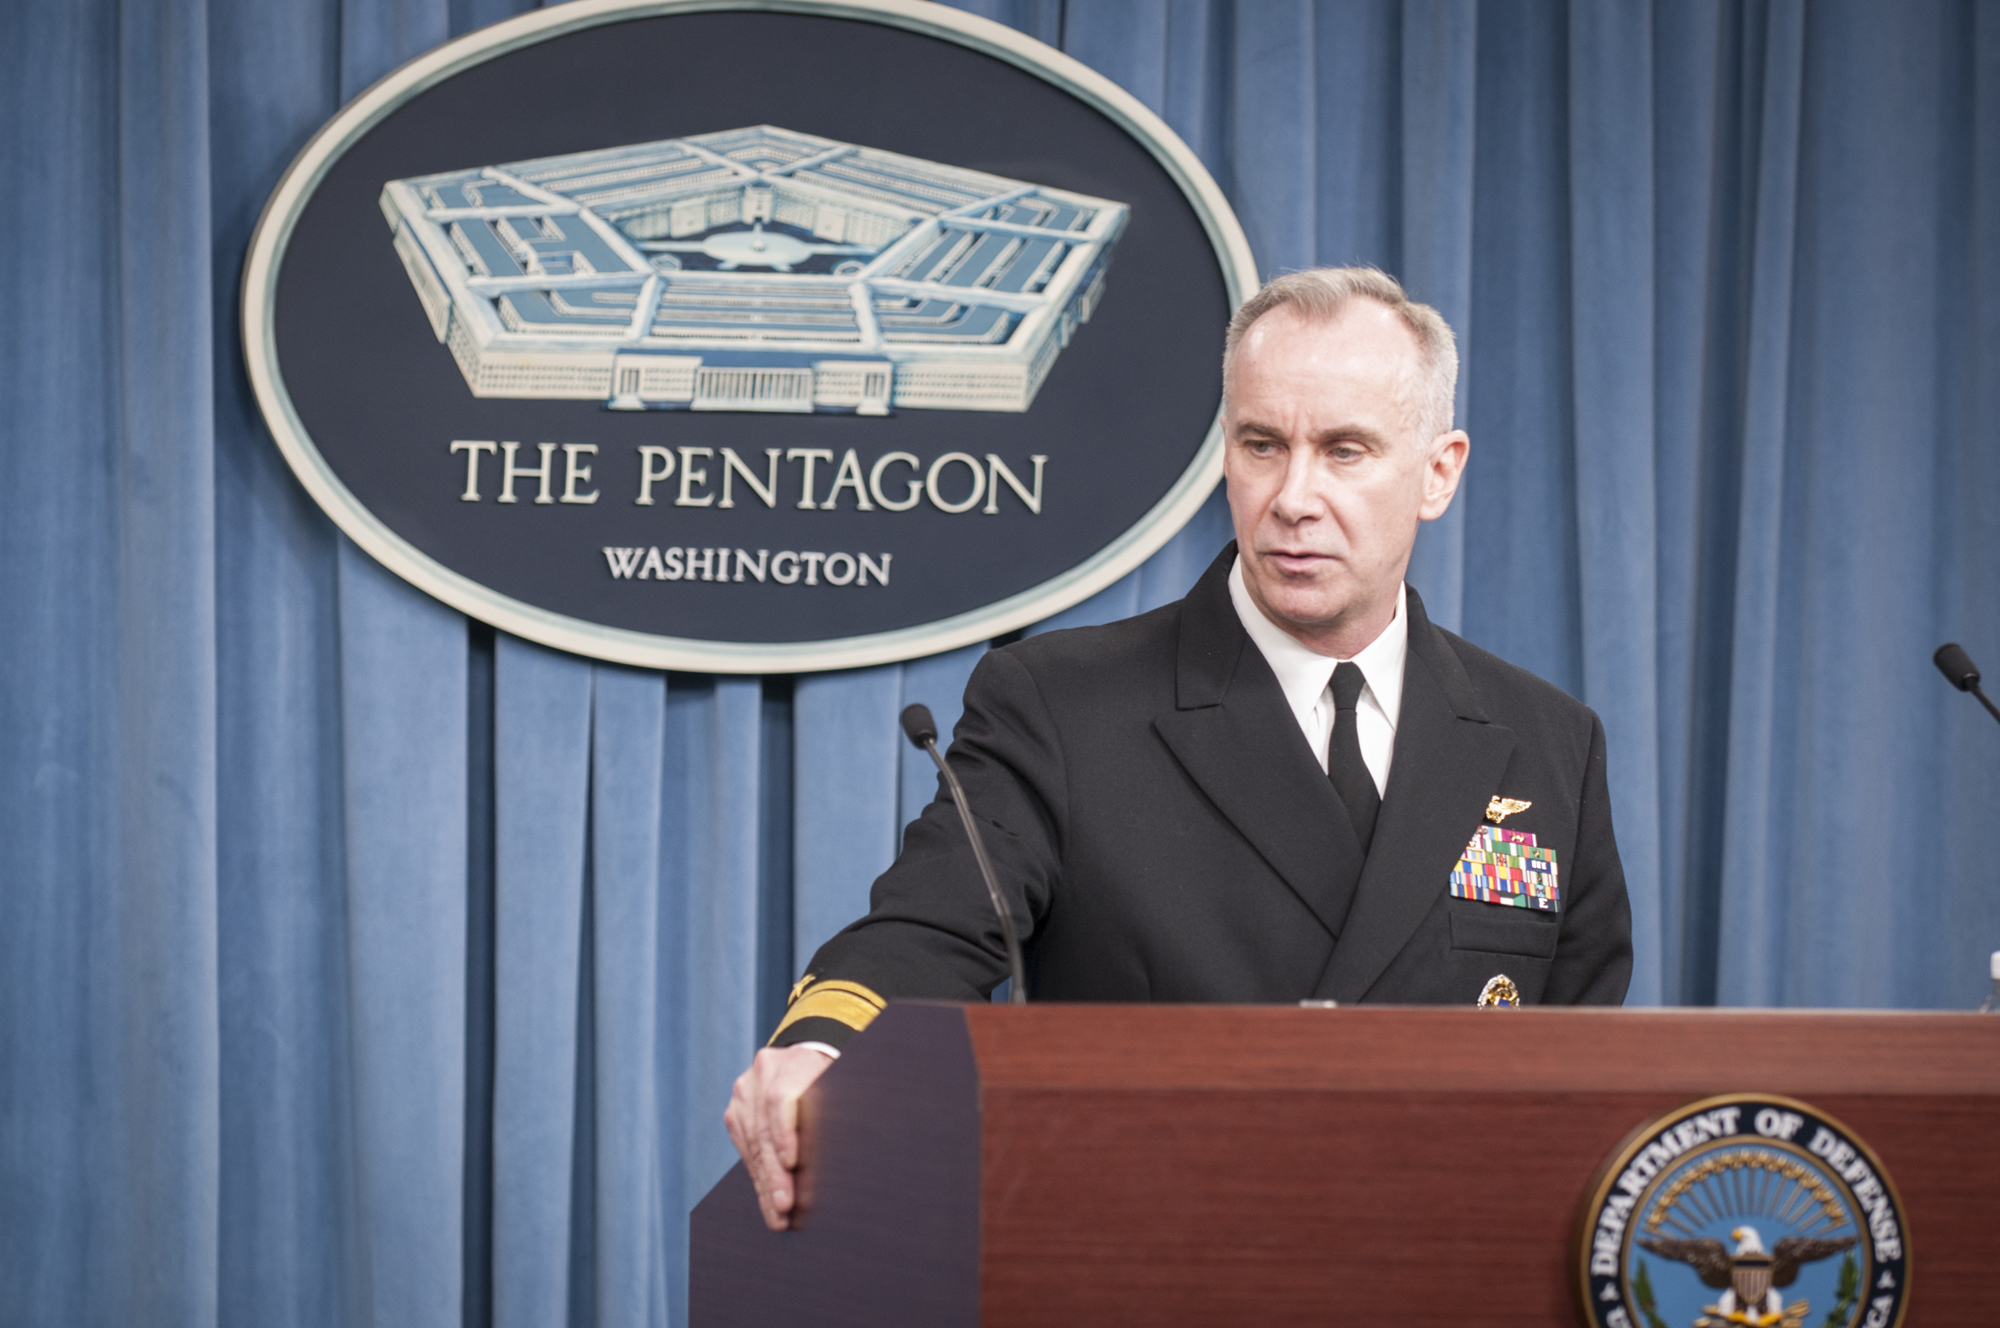 Rear Adm. William K. Lescher, Deputy Assistant Secretary of the Navy for Budget (FMB) Director, Fiscal Management Division, OPNAV (N82), delivers remarks during a press briefing following the release of the Department of the Navy’s proposed budget for fiscal year 2017. US Navy photo.